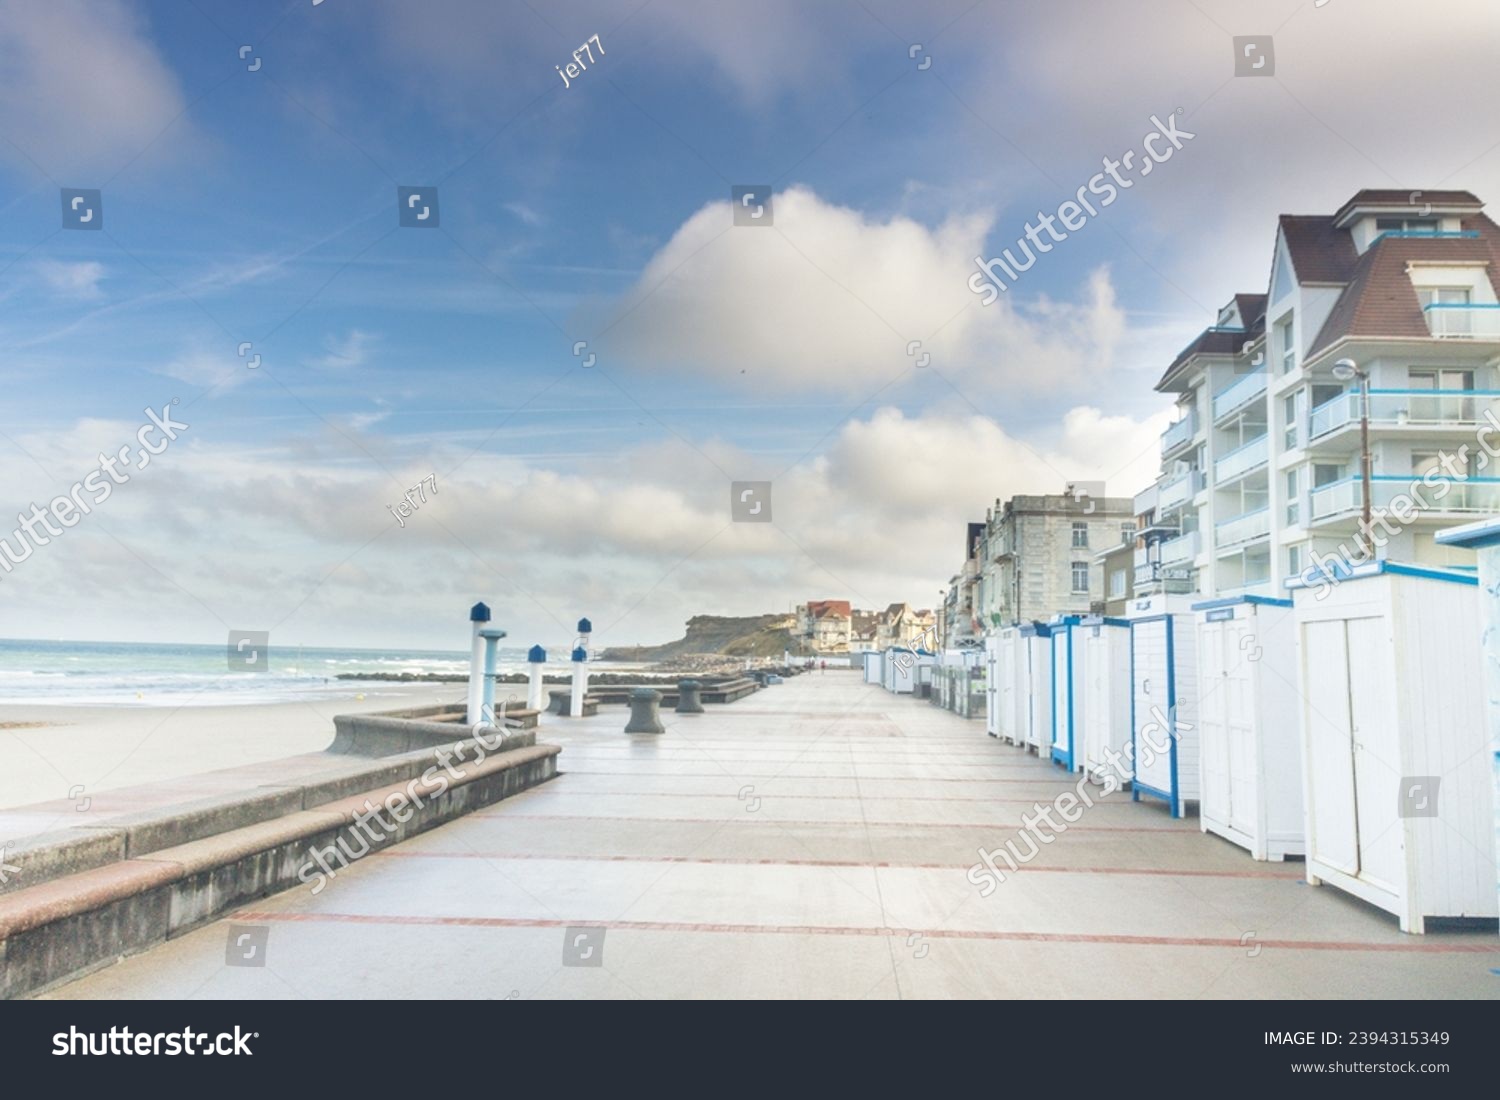 
Wimereux is a French commune located in the Pas-de-Calais department in the Hauts-de-France region. It is located on the banks of the Channel and at the mouth of the Wimereux river  #2394315349